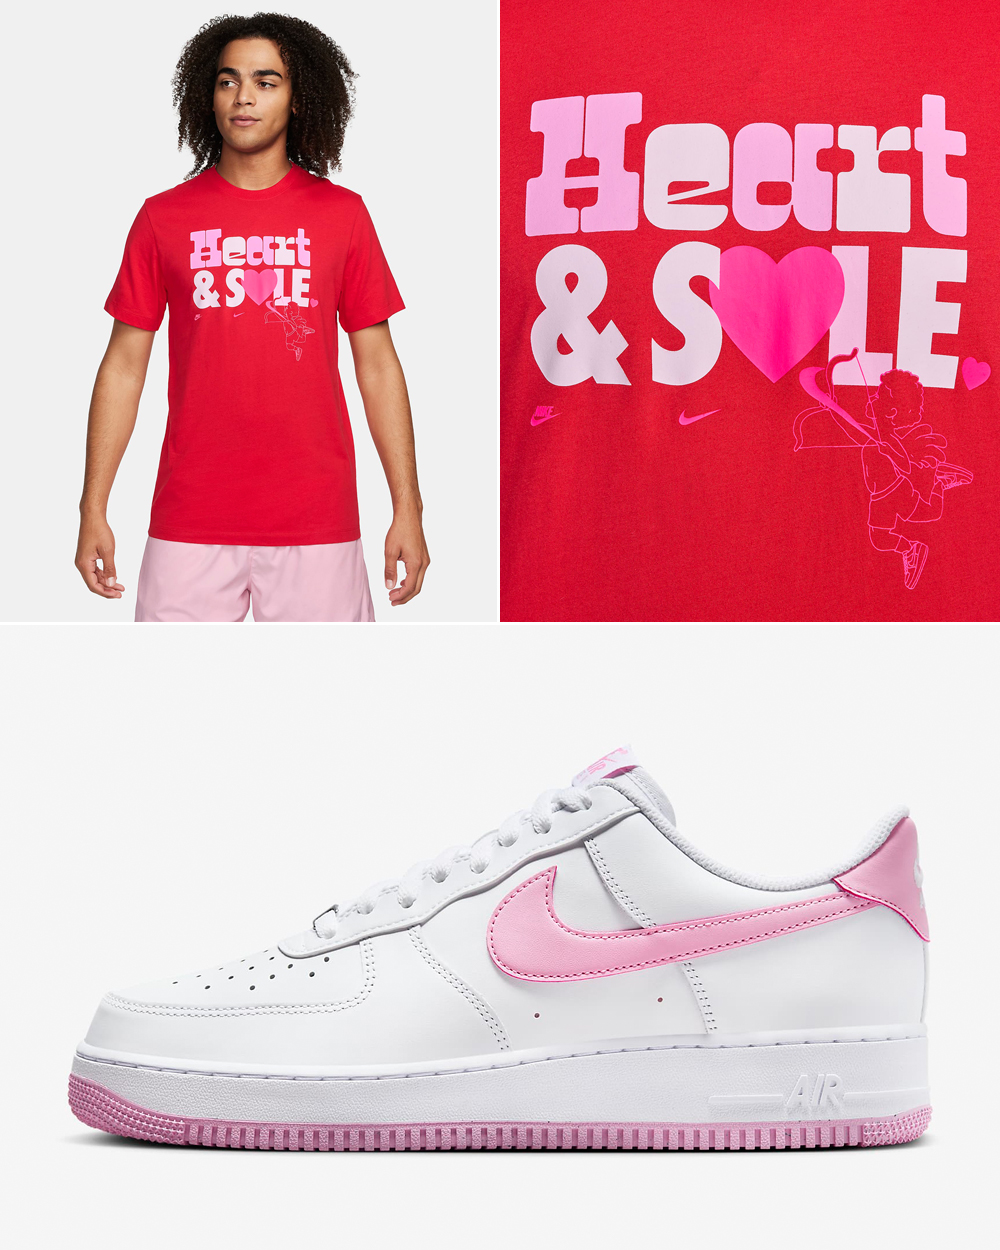 Nike-Valentines-Day-Air-Force-1-White-Pink-Shirt-Matching-Outfit